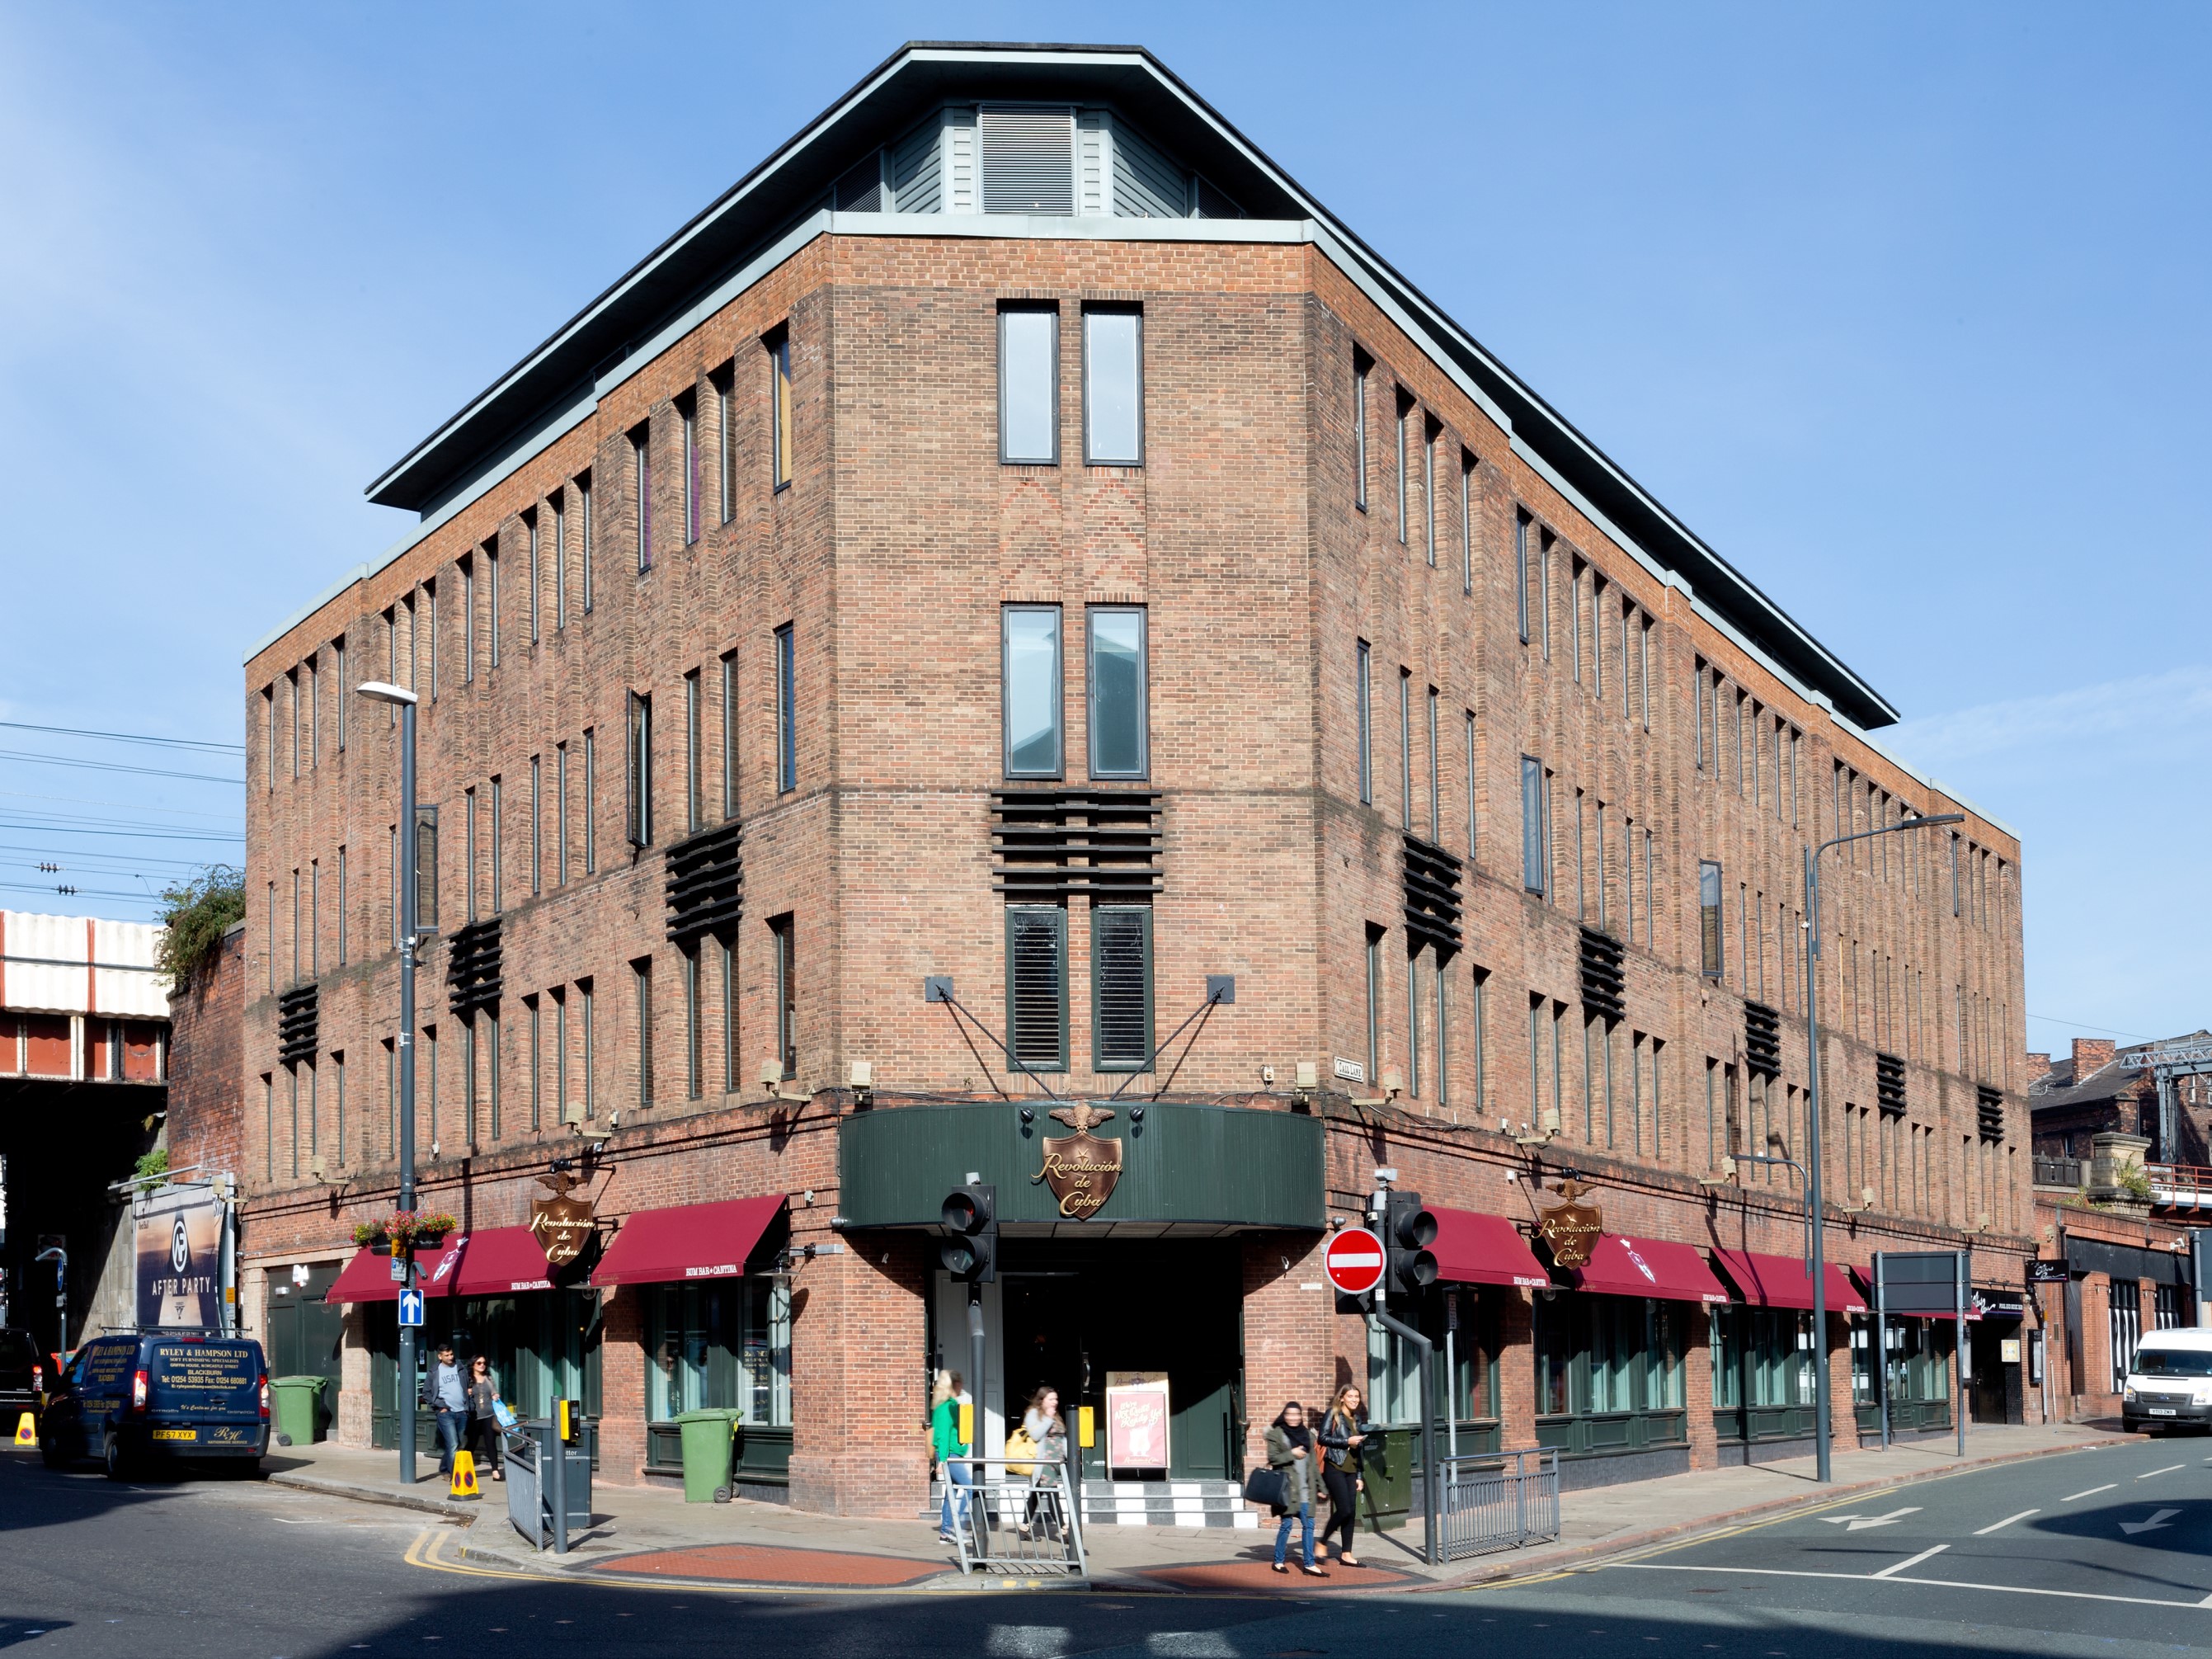 ADDINGTON CAPITAL EXTENDS ELBOW ROOM IN LEEDS AND PUTS MIXED-USE PROPERTY UP FOR SALE